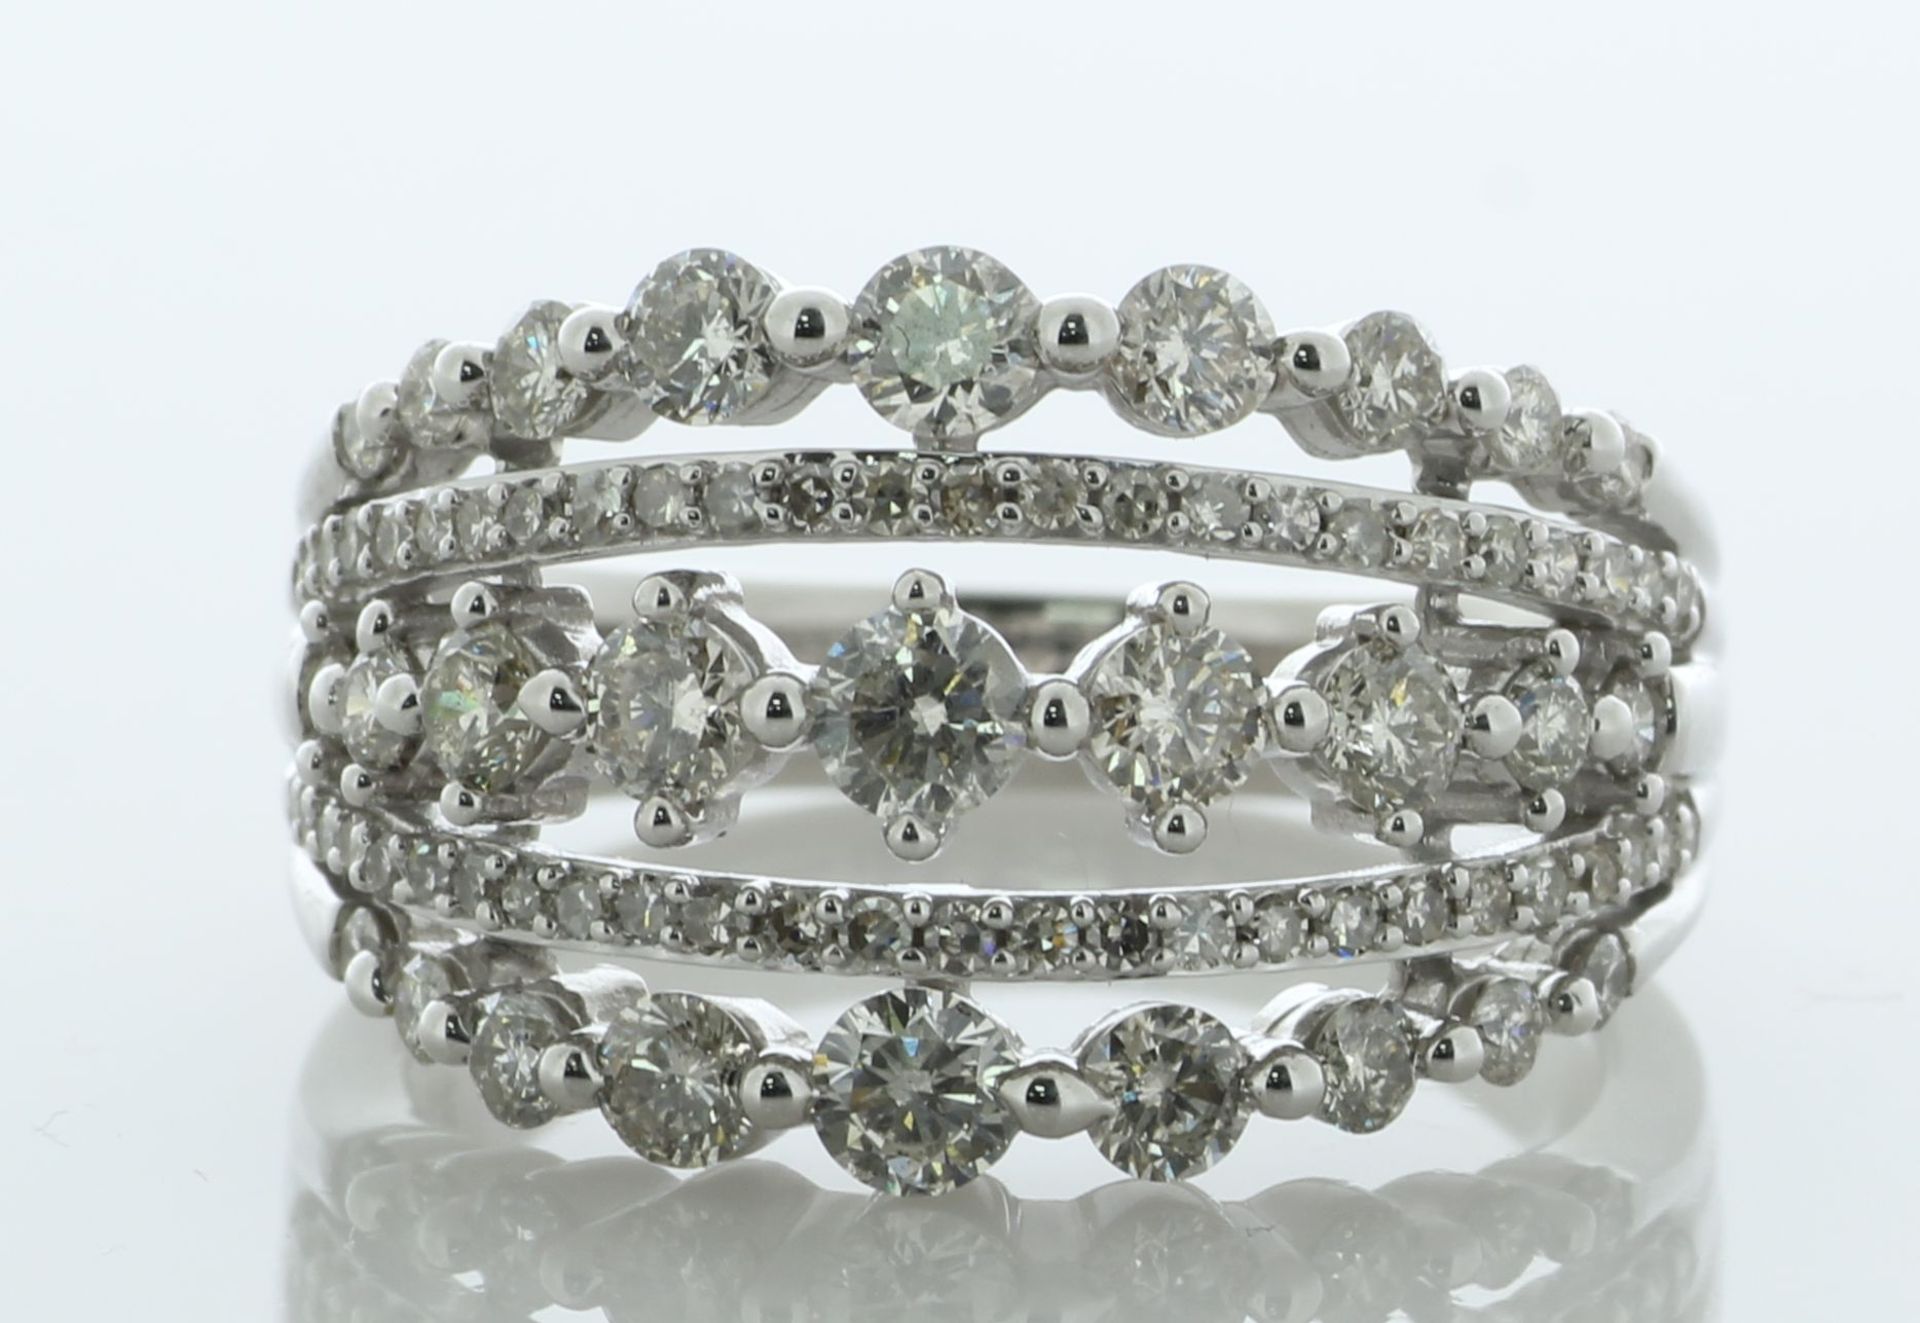 14ct White Gold Half Eternity Diamond Ring 1.76 Carats - Valued By AGI £5,995.00 - This stunning